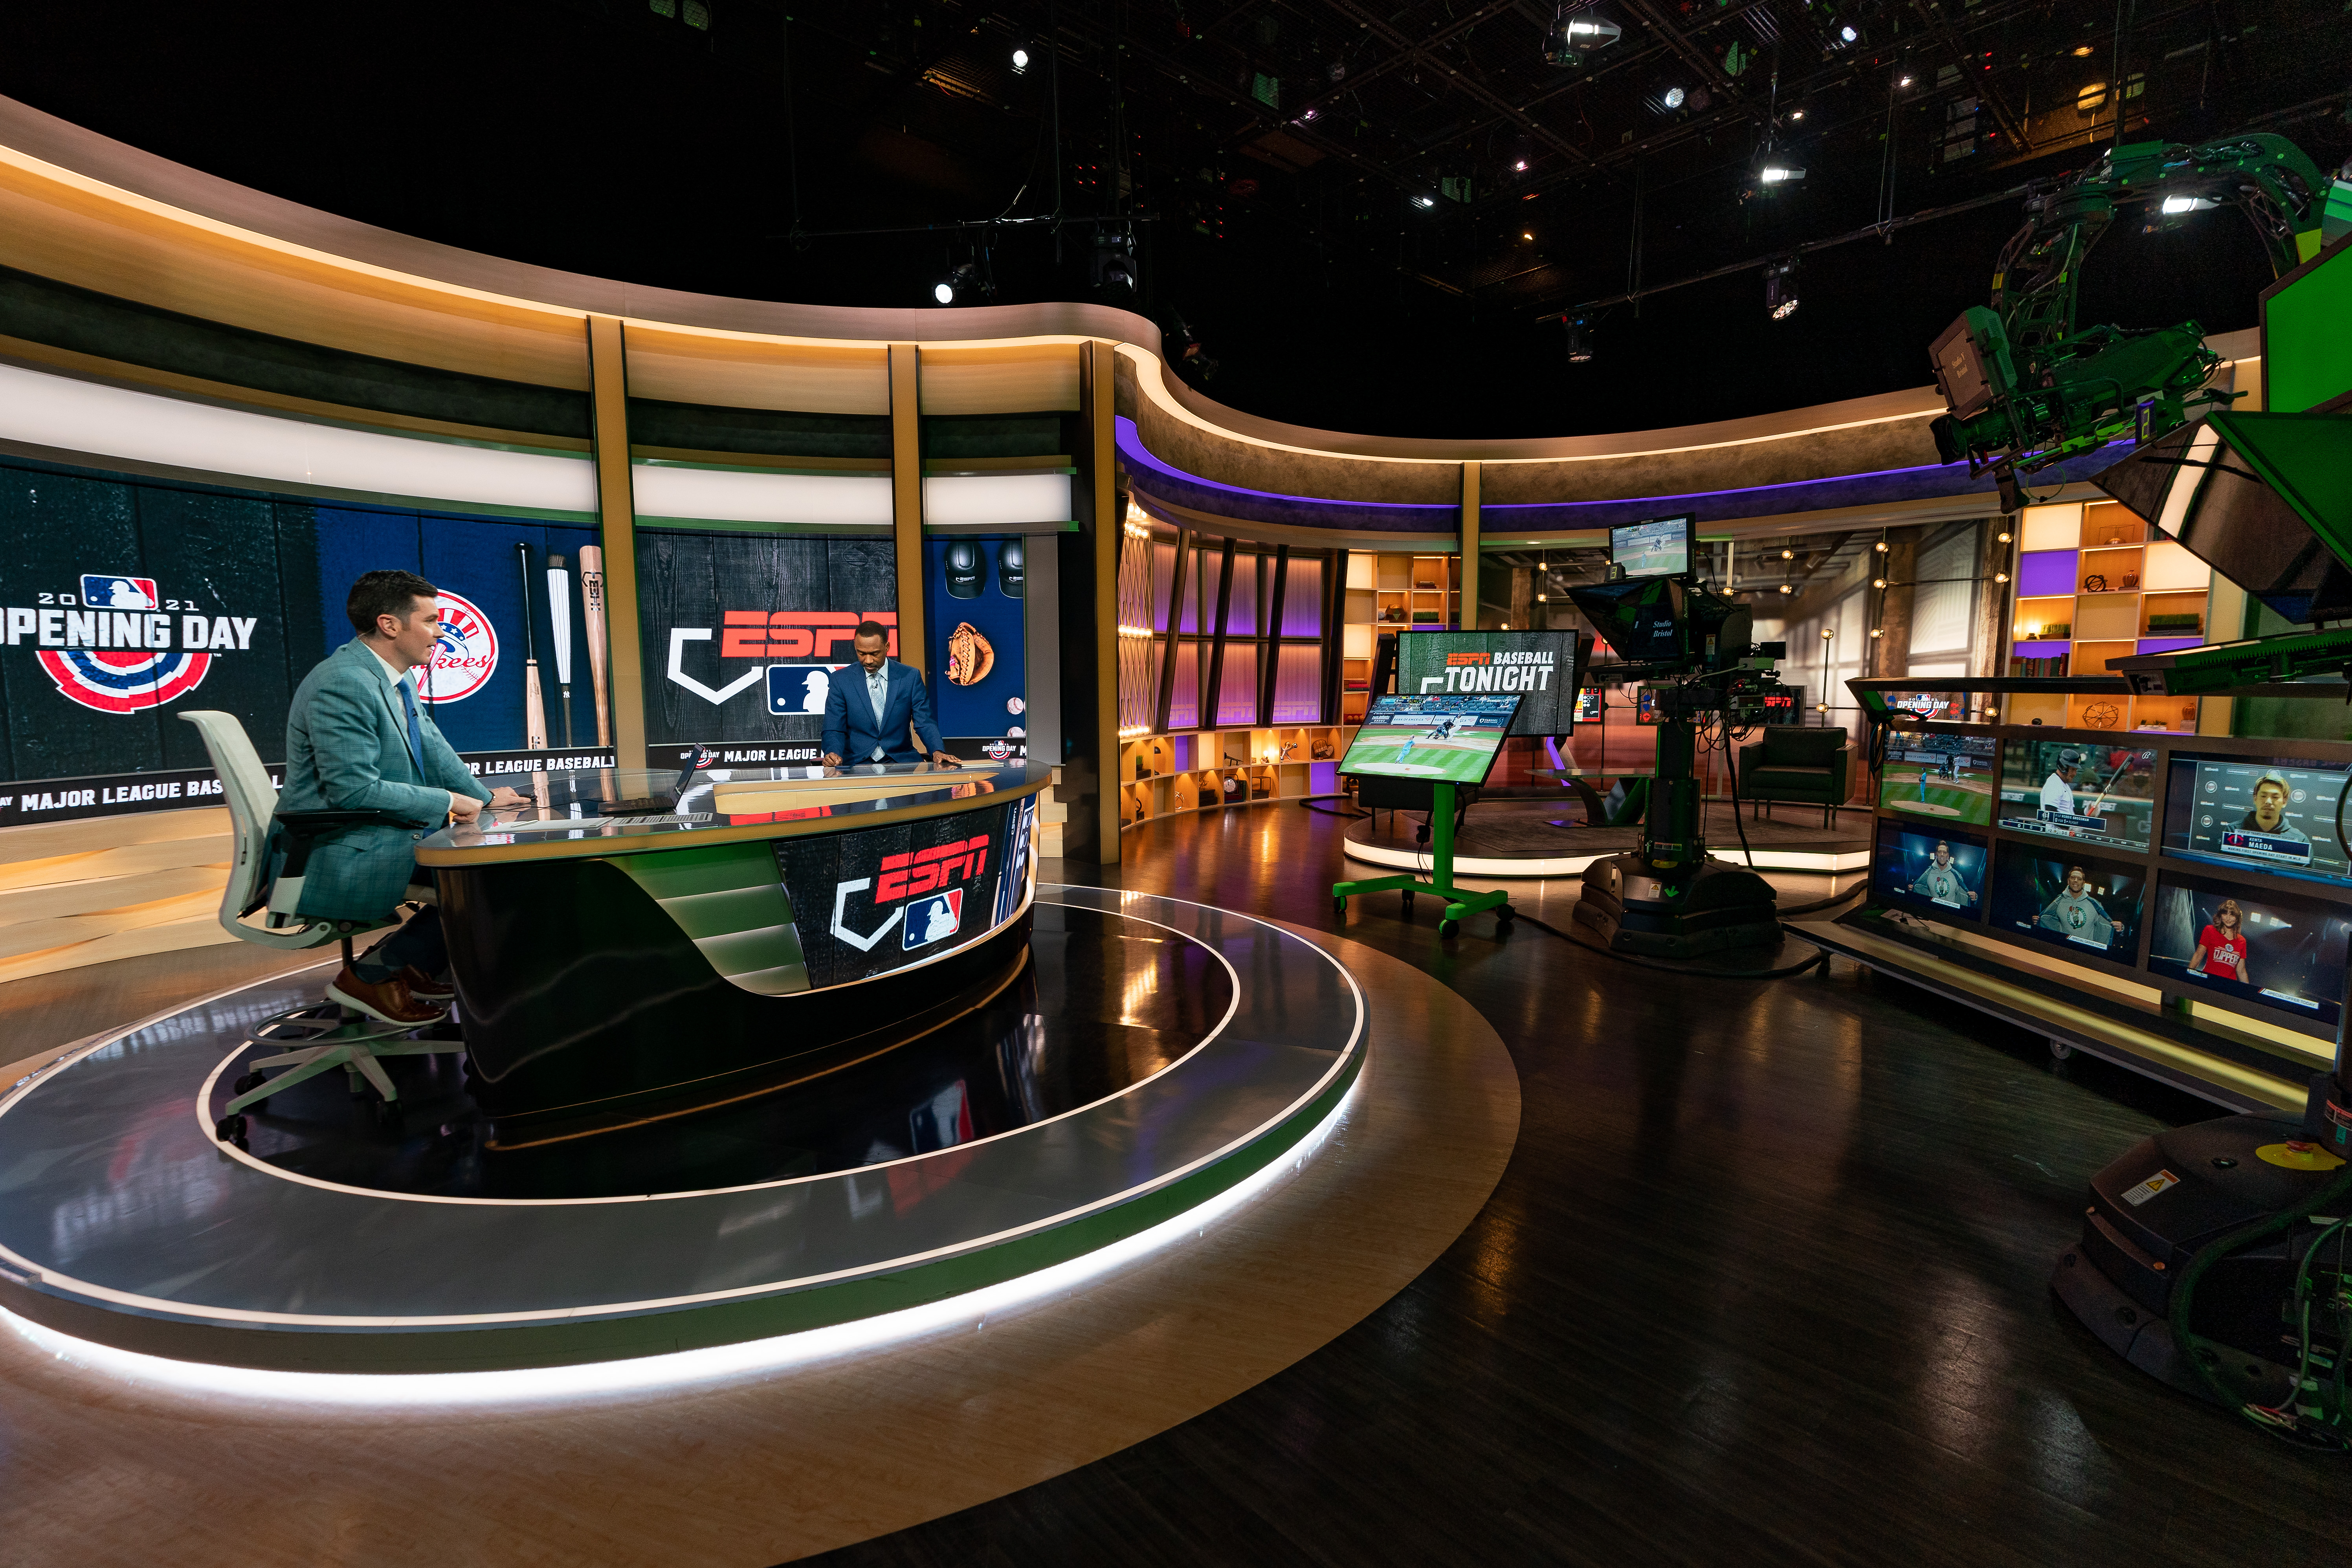 ESPNs new MLB deal focuses on exclusivity and streaming